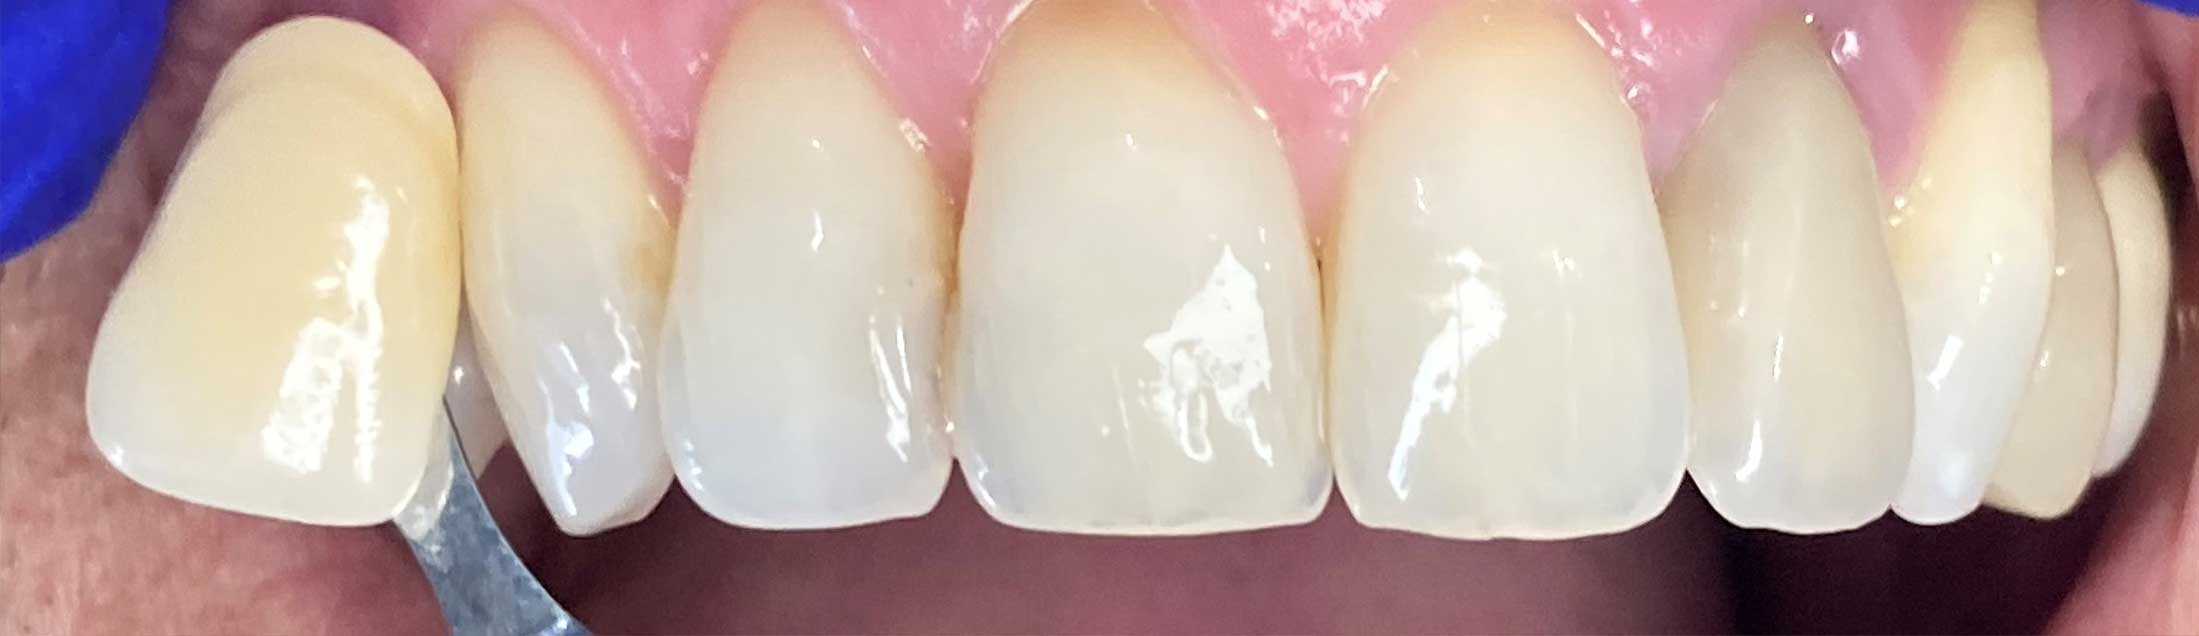 teeth whitening after treatment